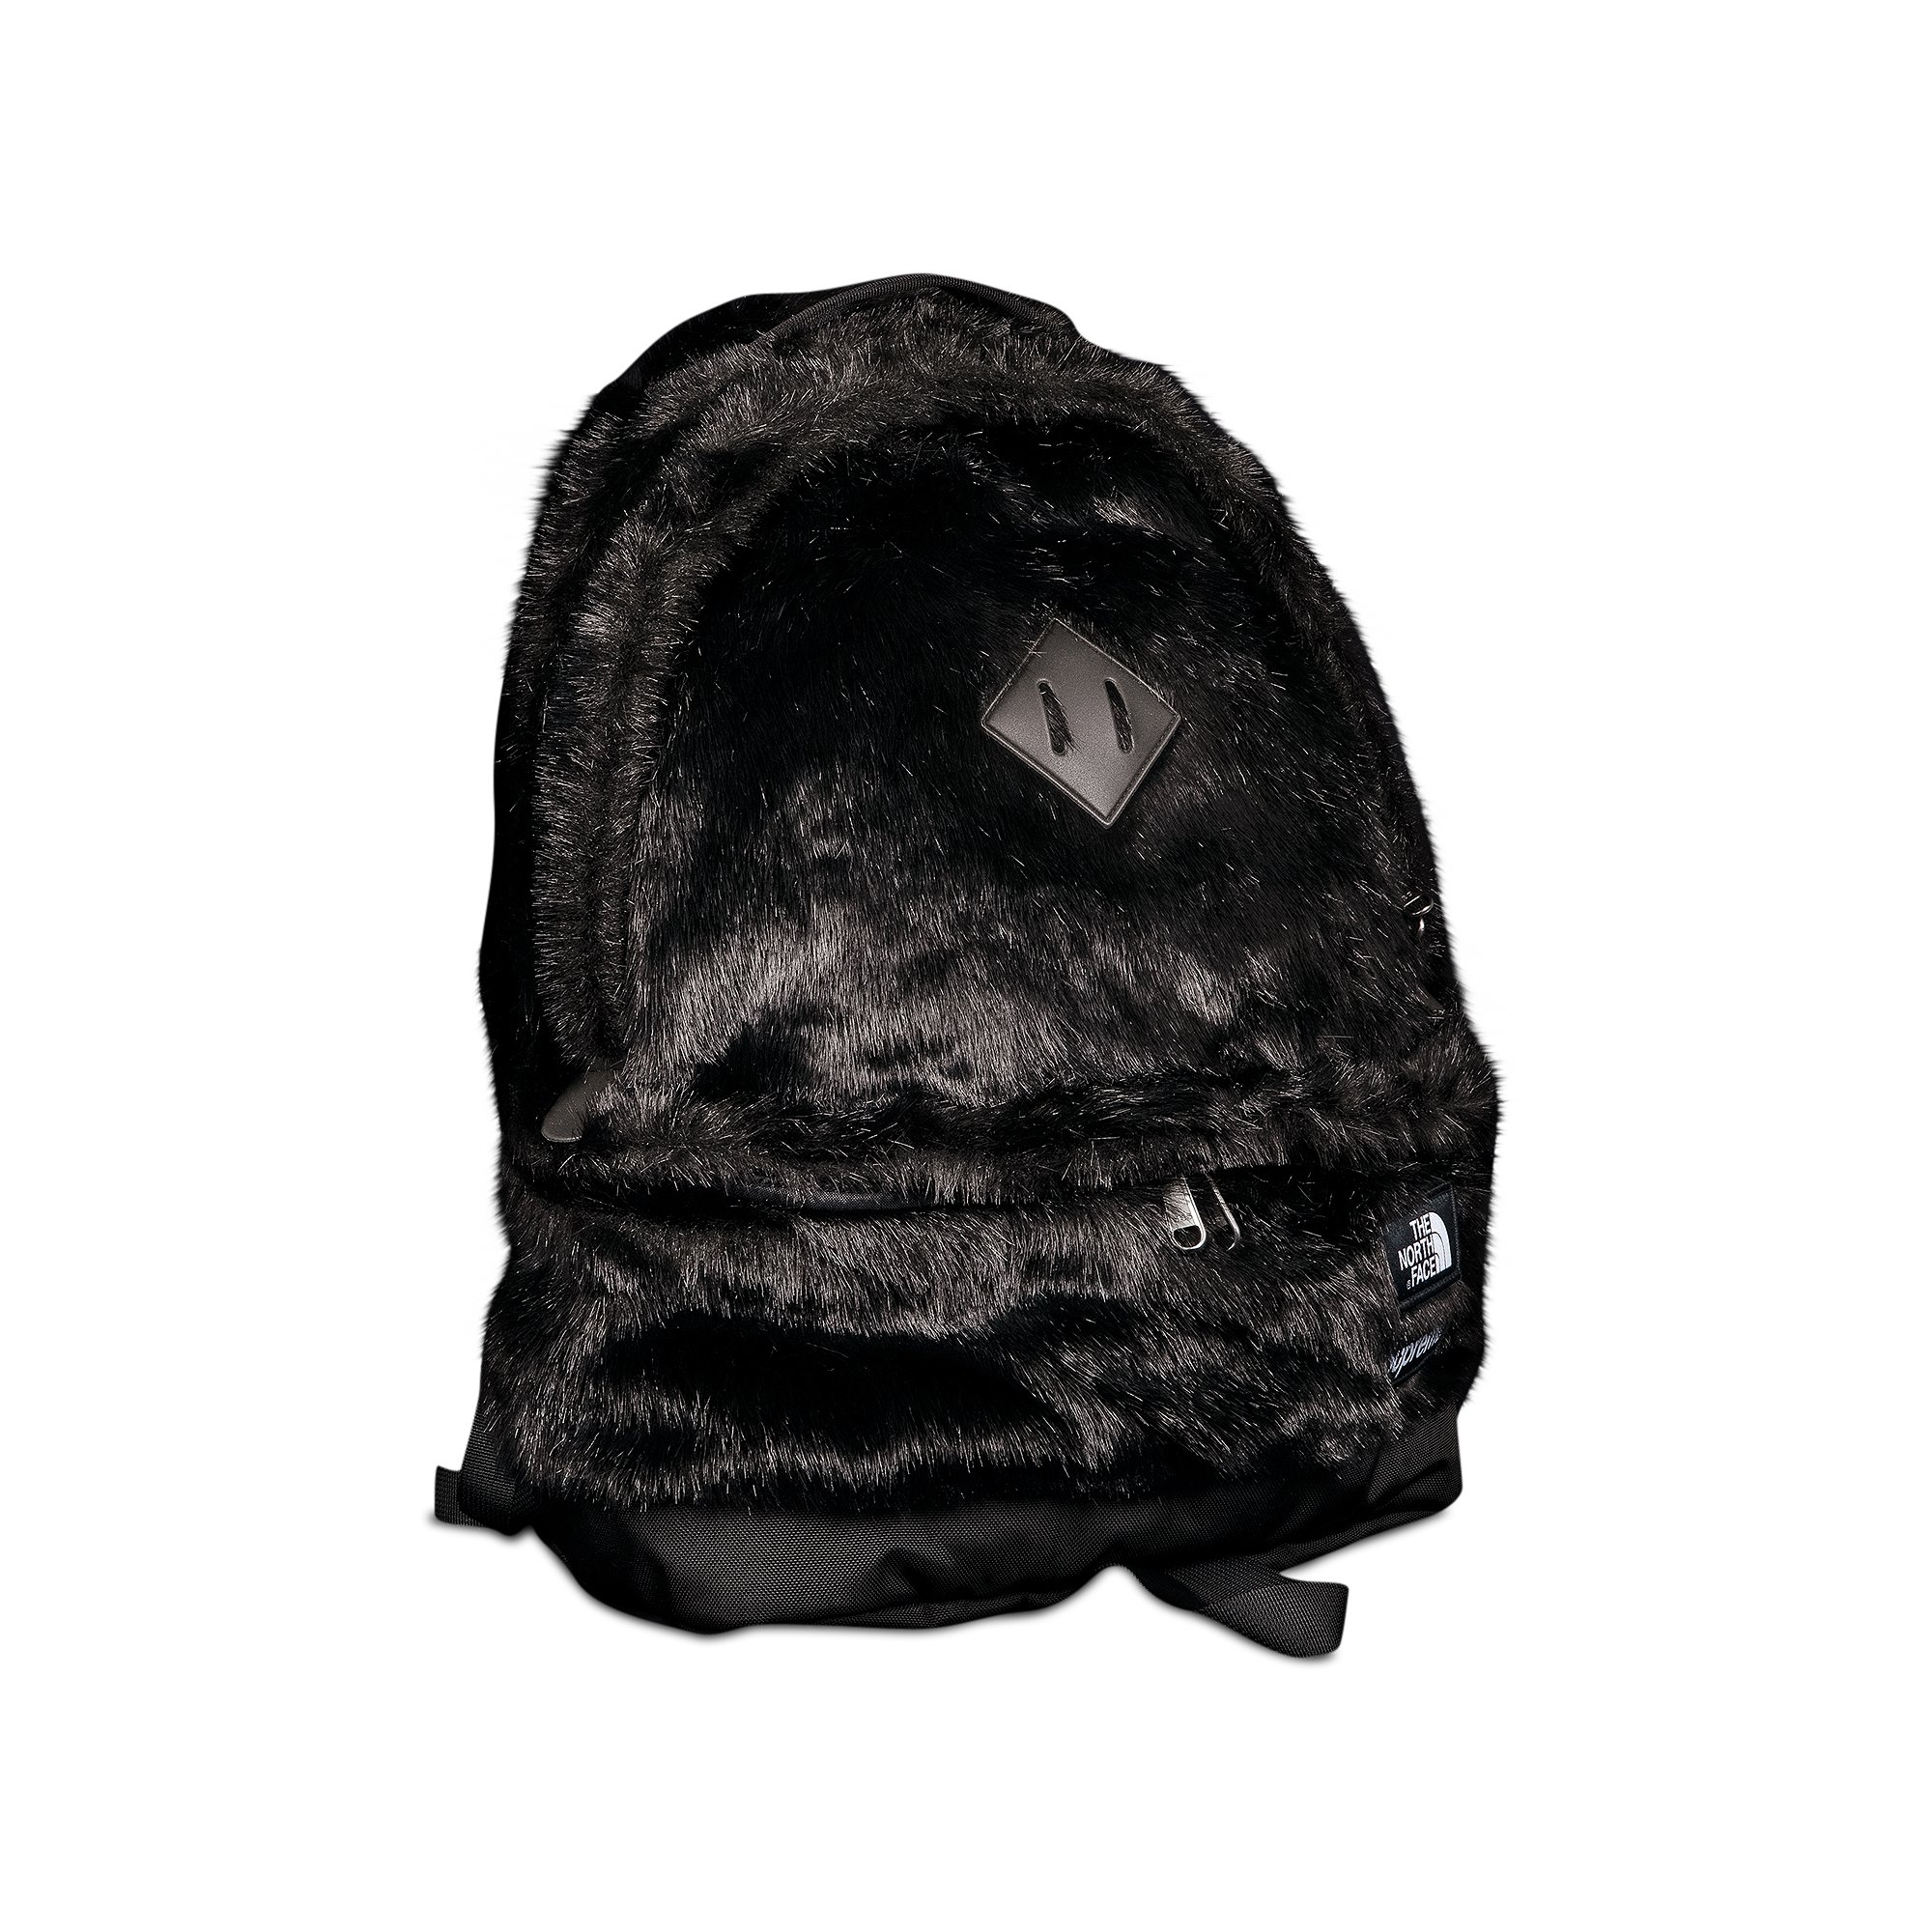 Buy Supreme x The North Face Faux Fur Backpack 'Black' - FW20B15 